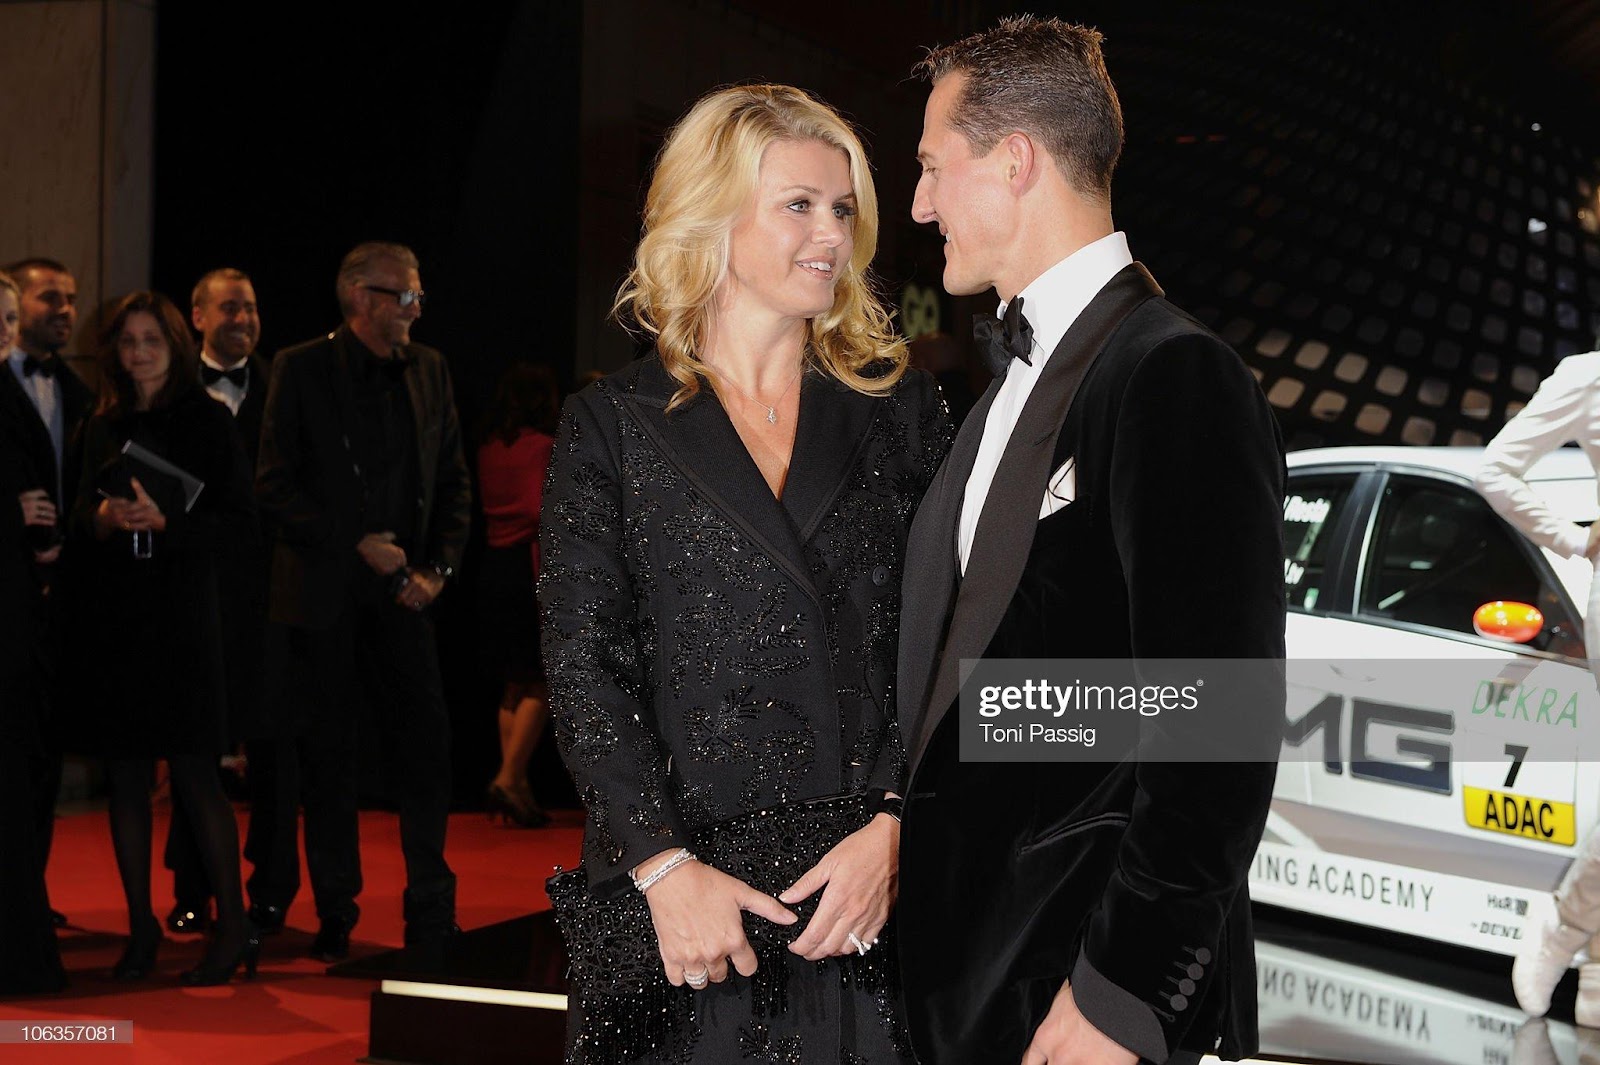 Michael Schumacher and wife Corinna attend the GQ Men of the Year 2010 award ceremony at Komische Oper on October 29, 2010 in Berlin, Germany.